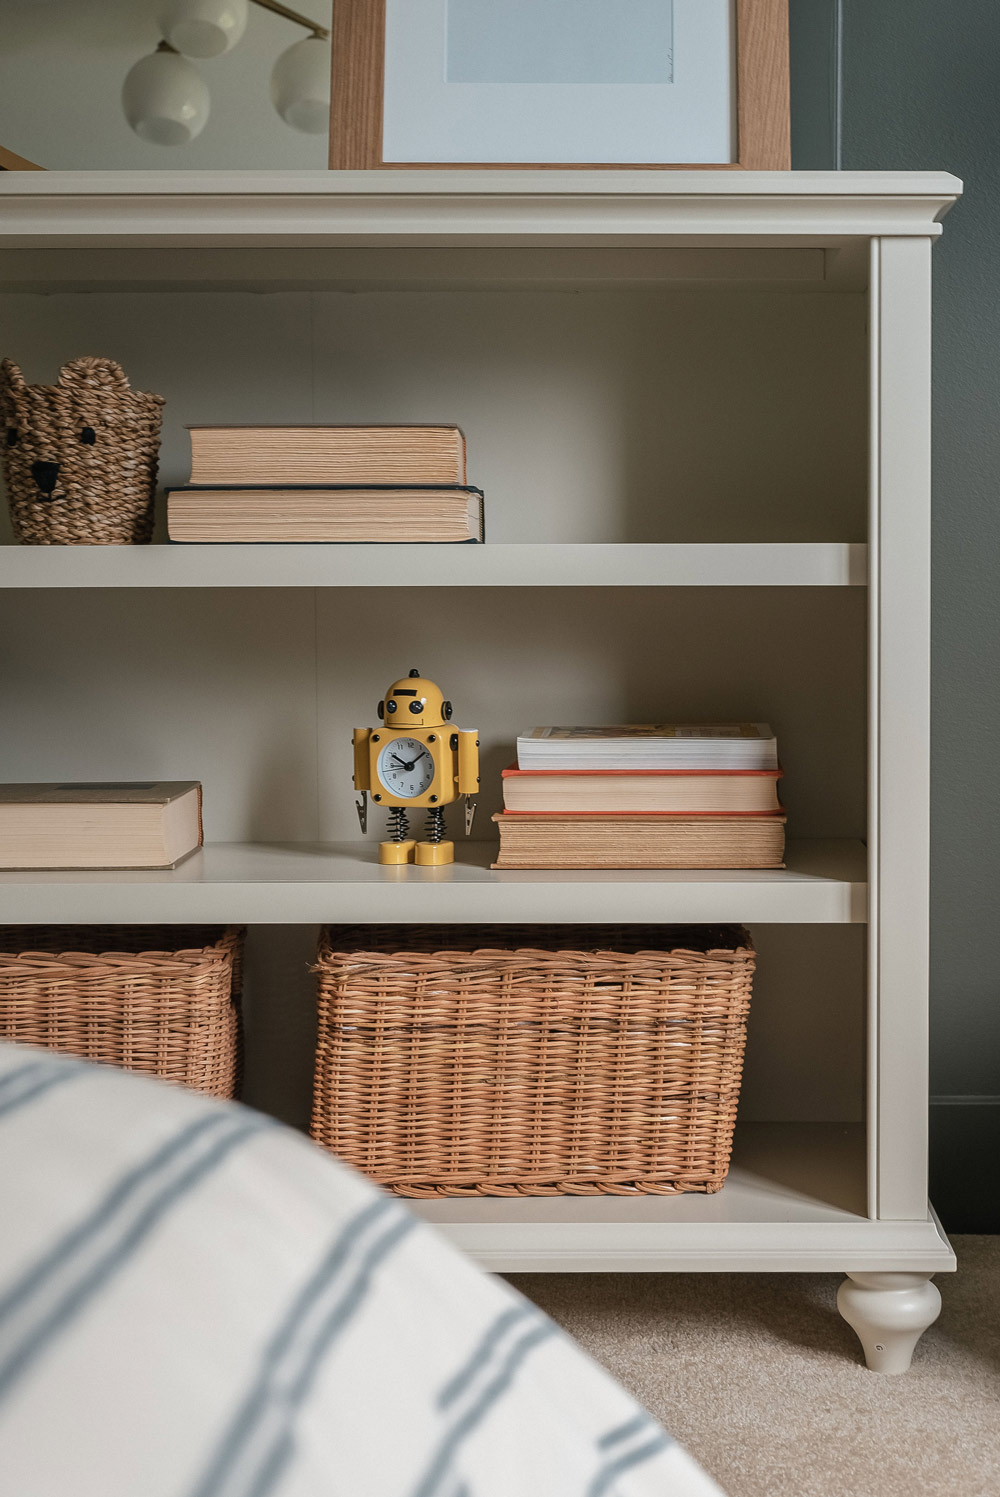 A bookshelf styled with baskets, books, and a yellow toy robot.